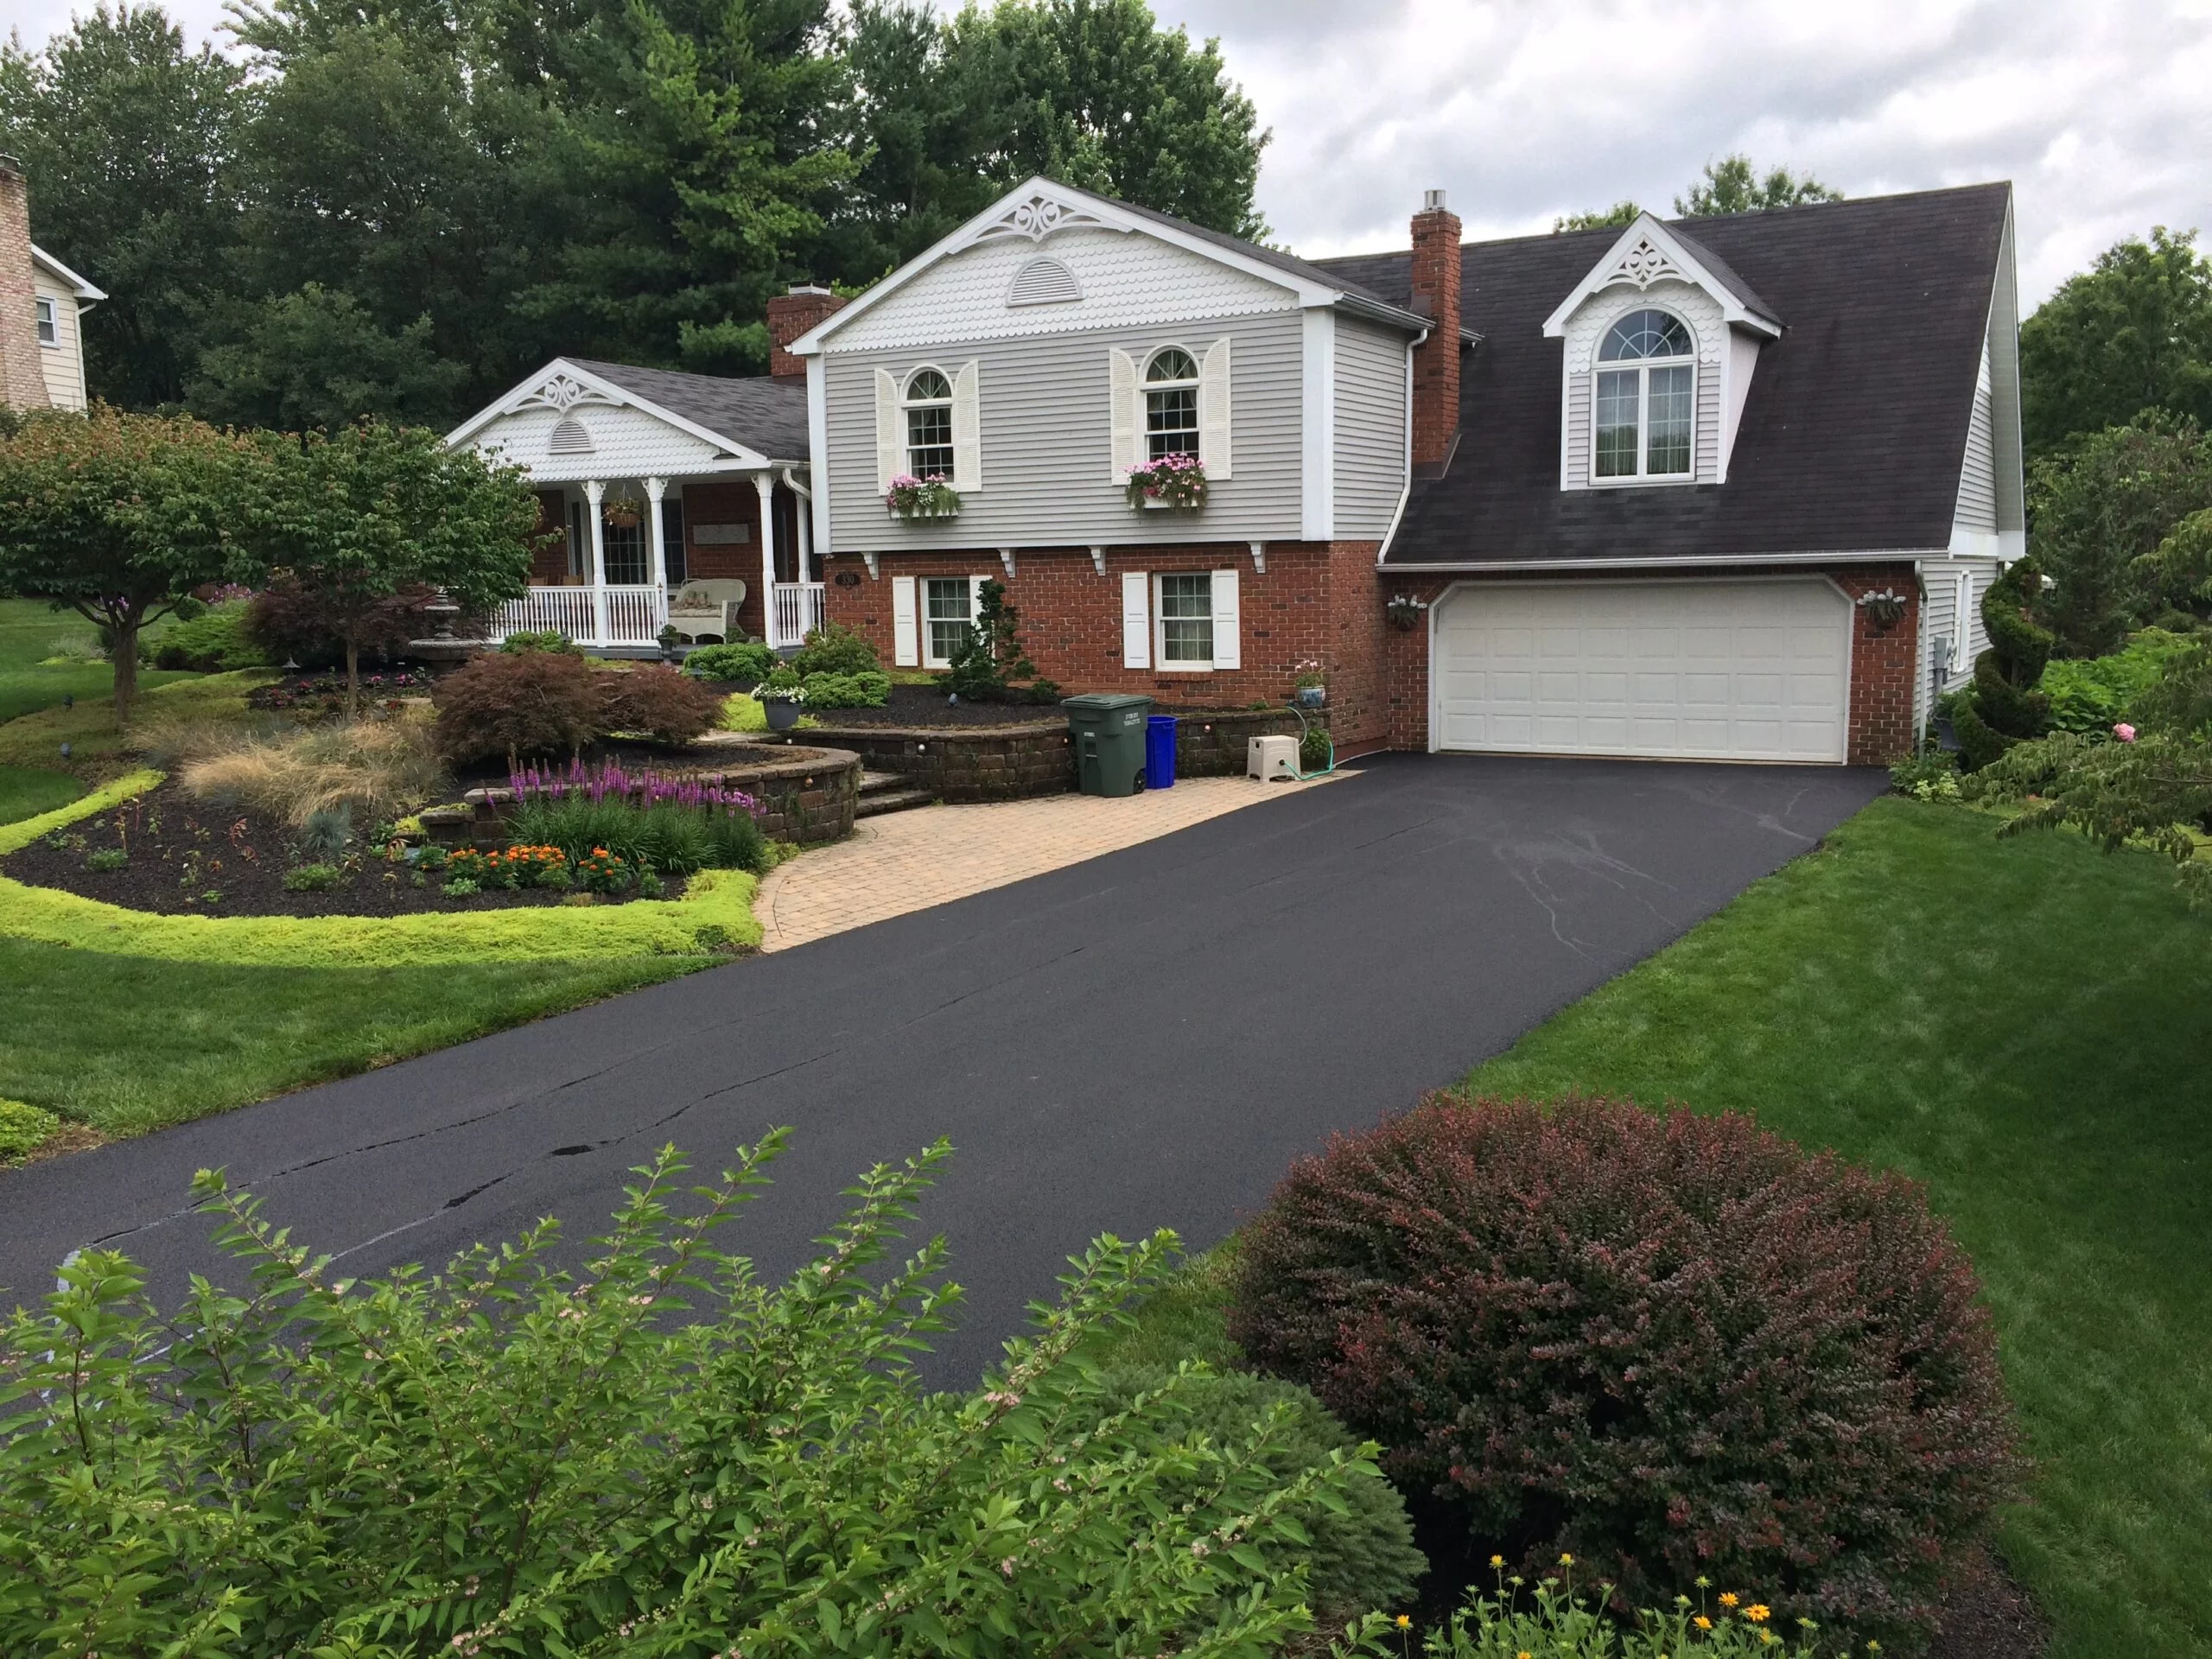 New Driveway at Residential Dallastown, PA Home at Emory J. Peters Excavating and Paving Contractor, Inc.